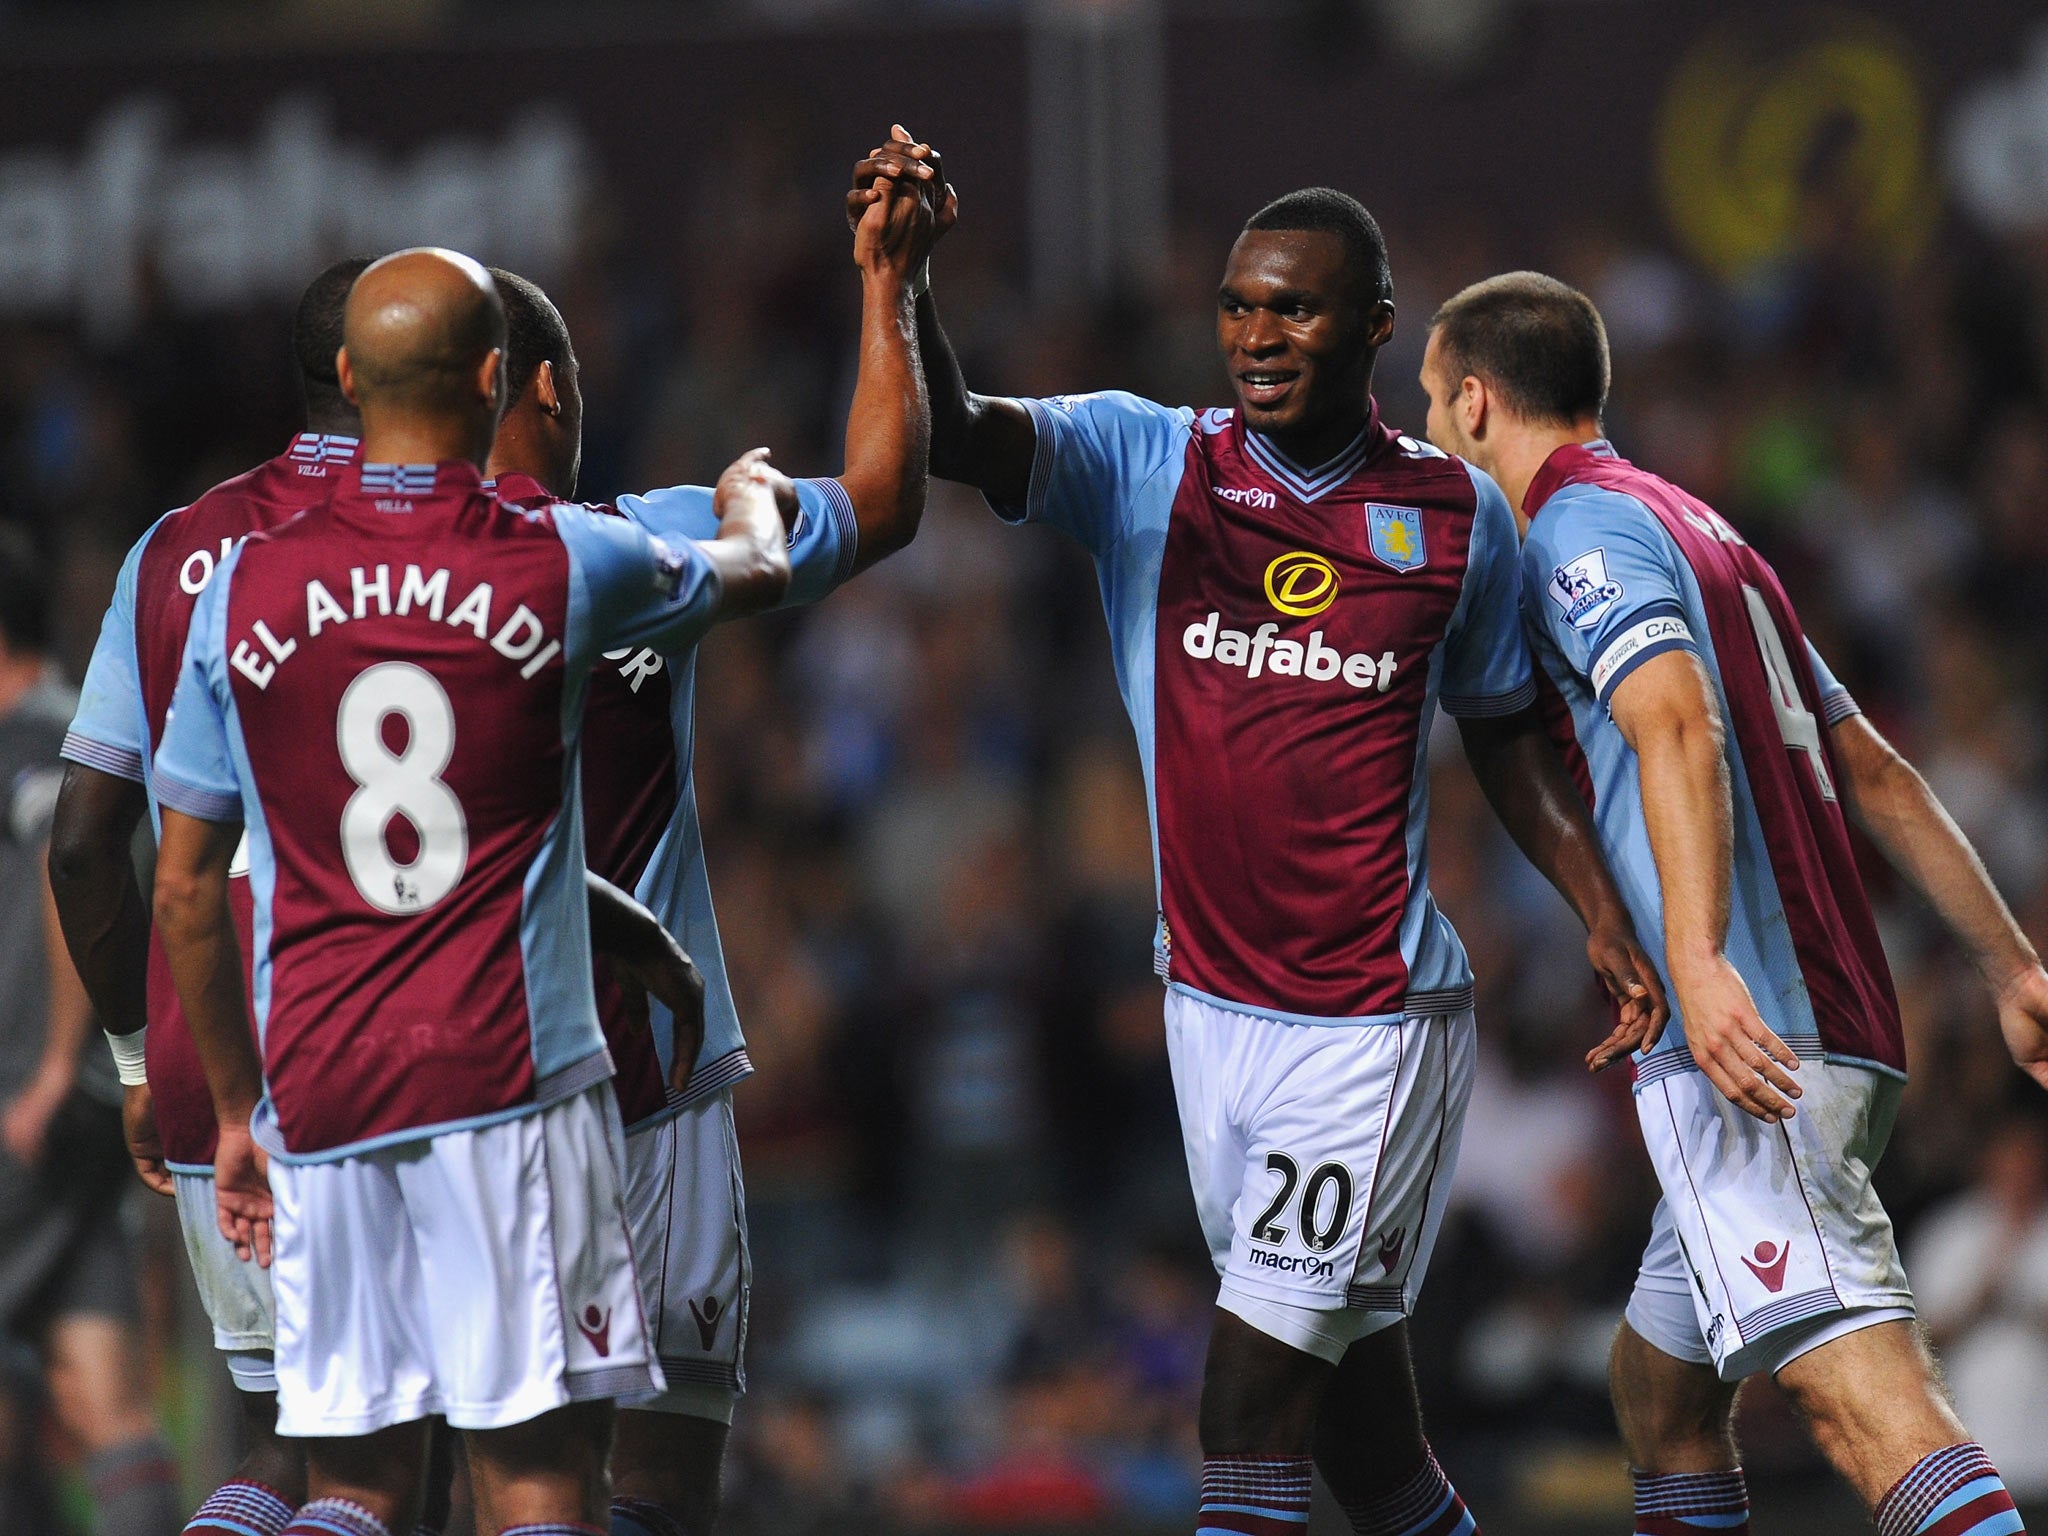 Aston Villa player Christian Benteke celebrates after scoring the second goal during the Capital One Cup second round match between Aston Villa and Rotherham